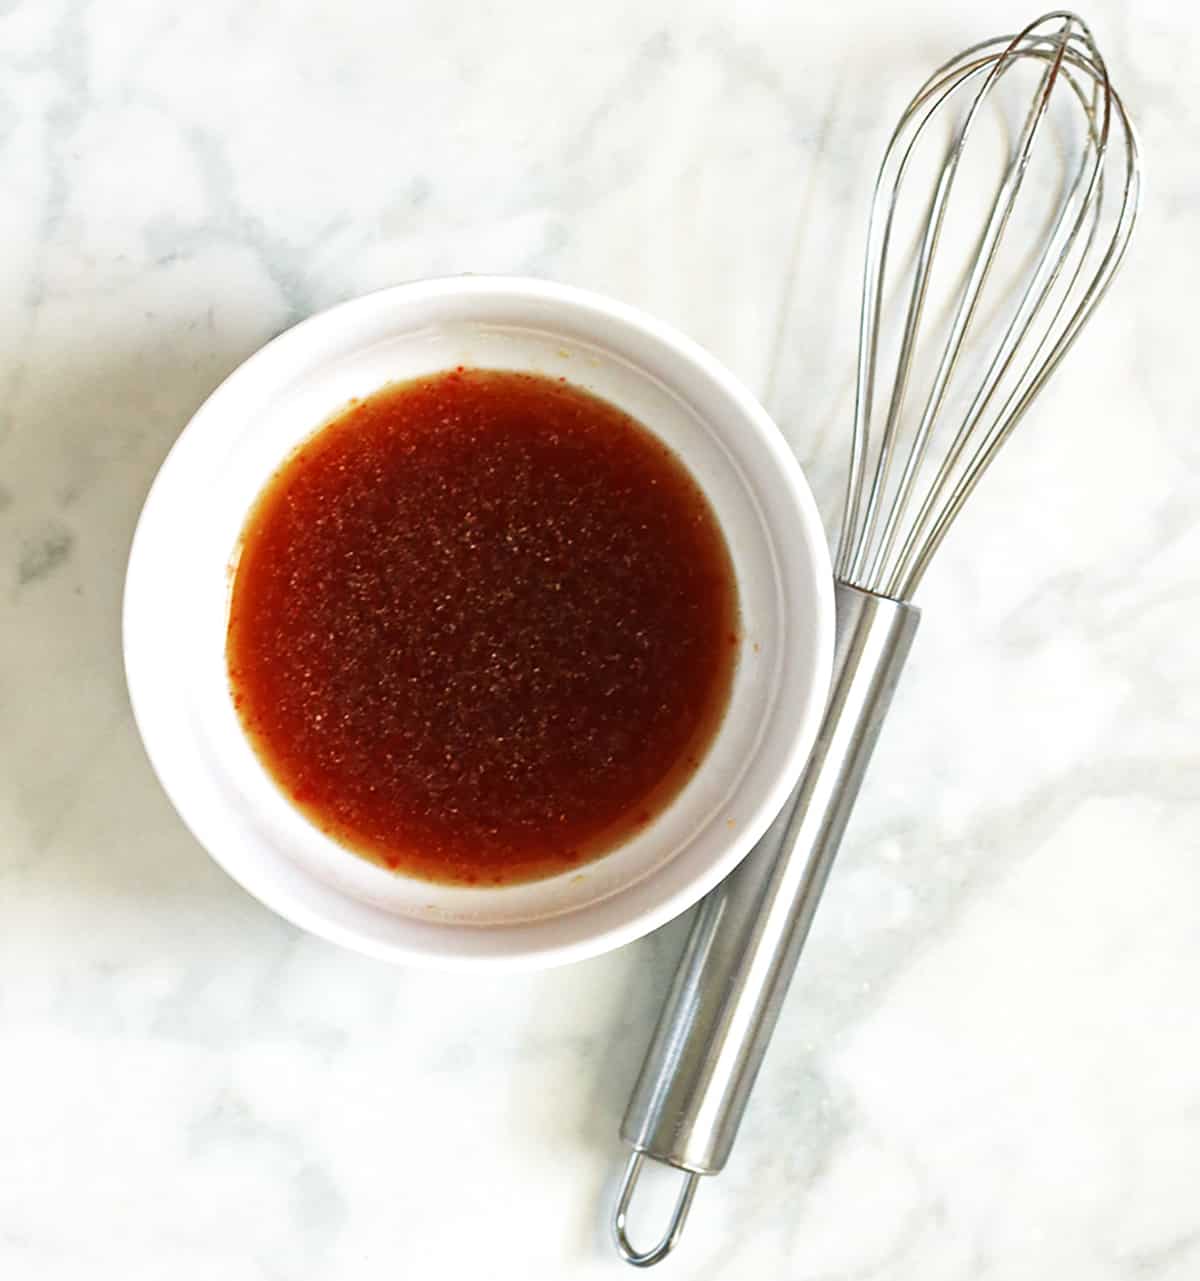 flavoring sauce for vegan meatless crumbles recipe in white bowl with whisk.